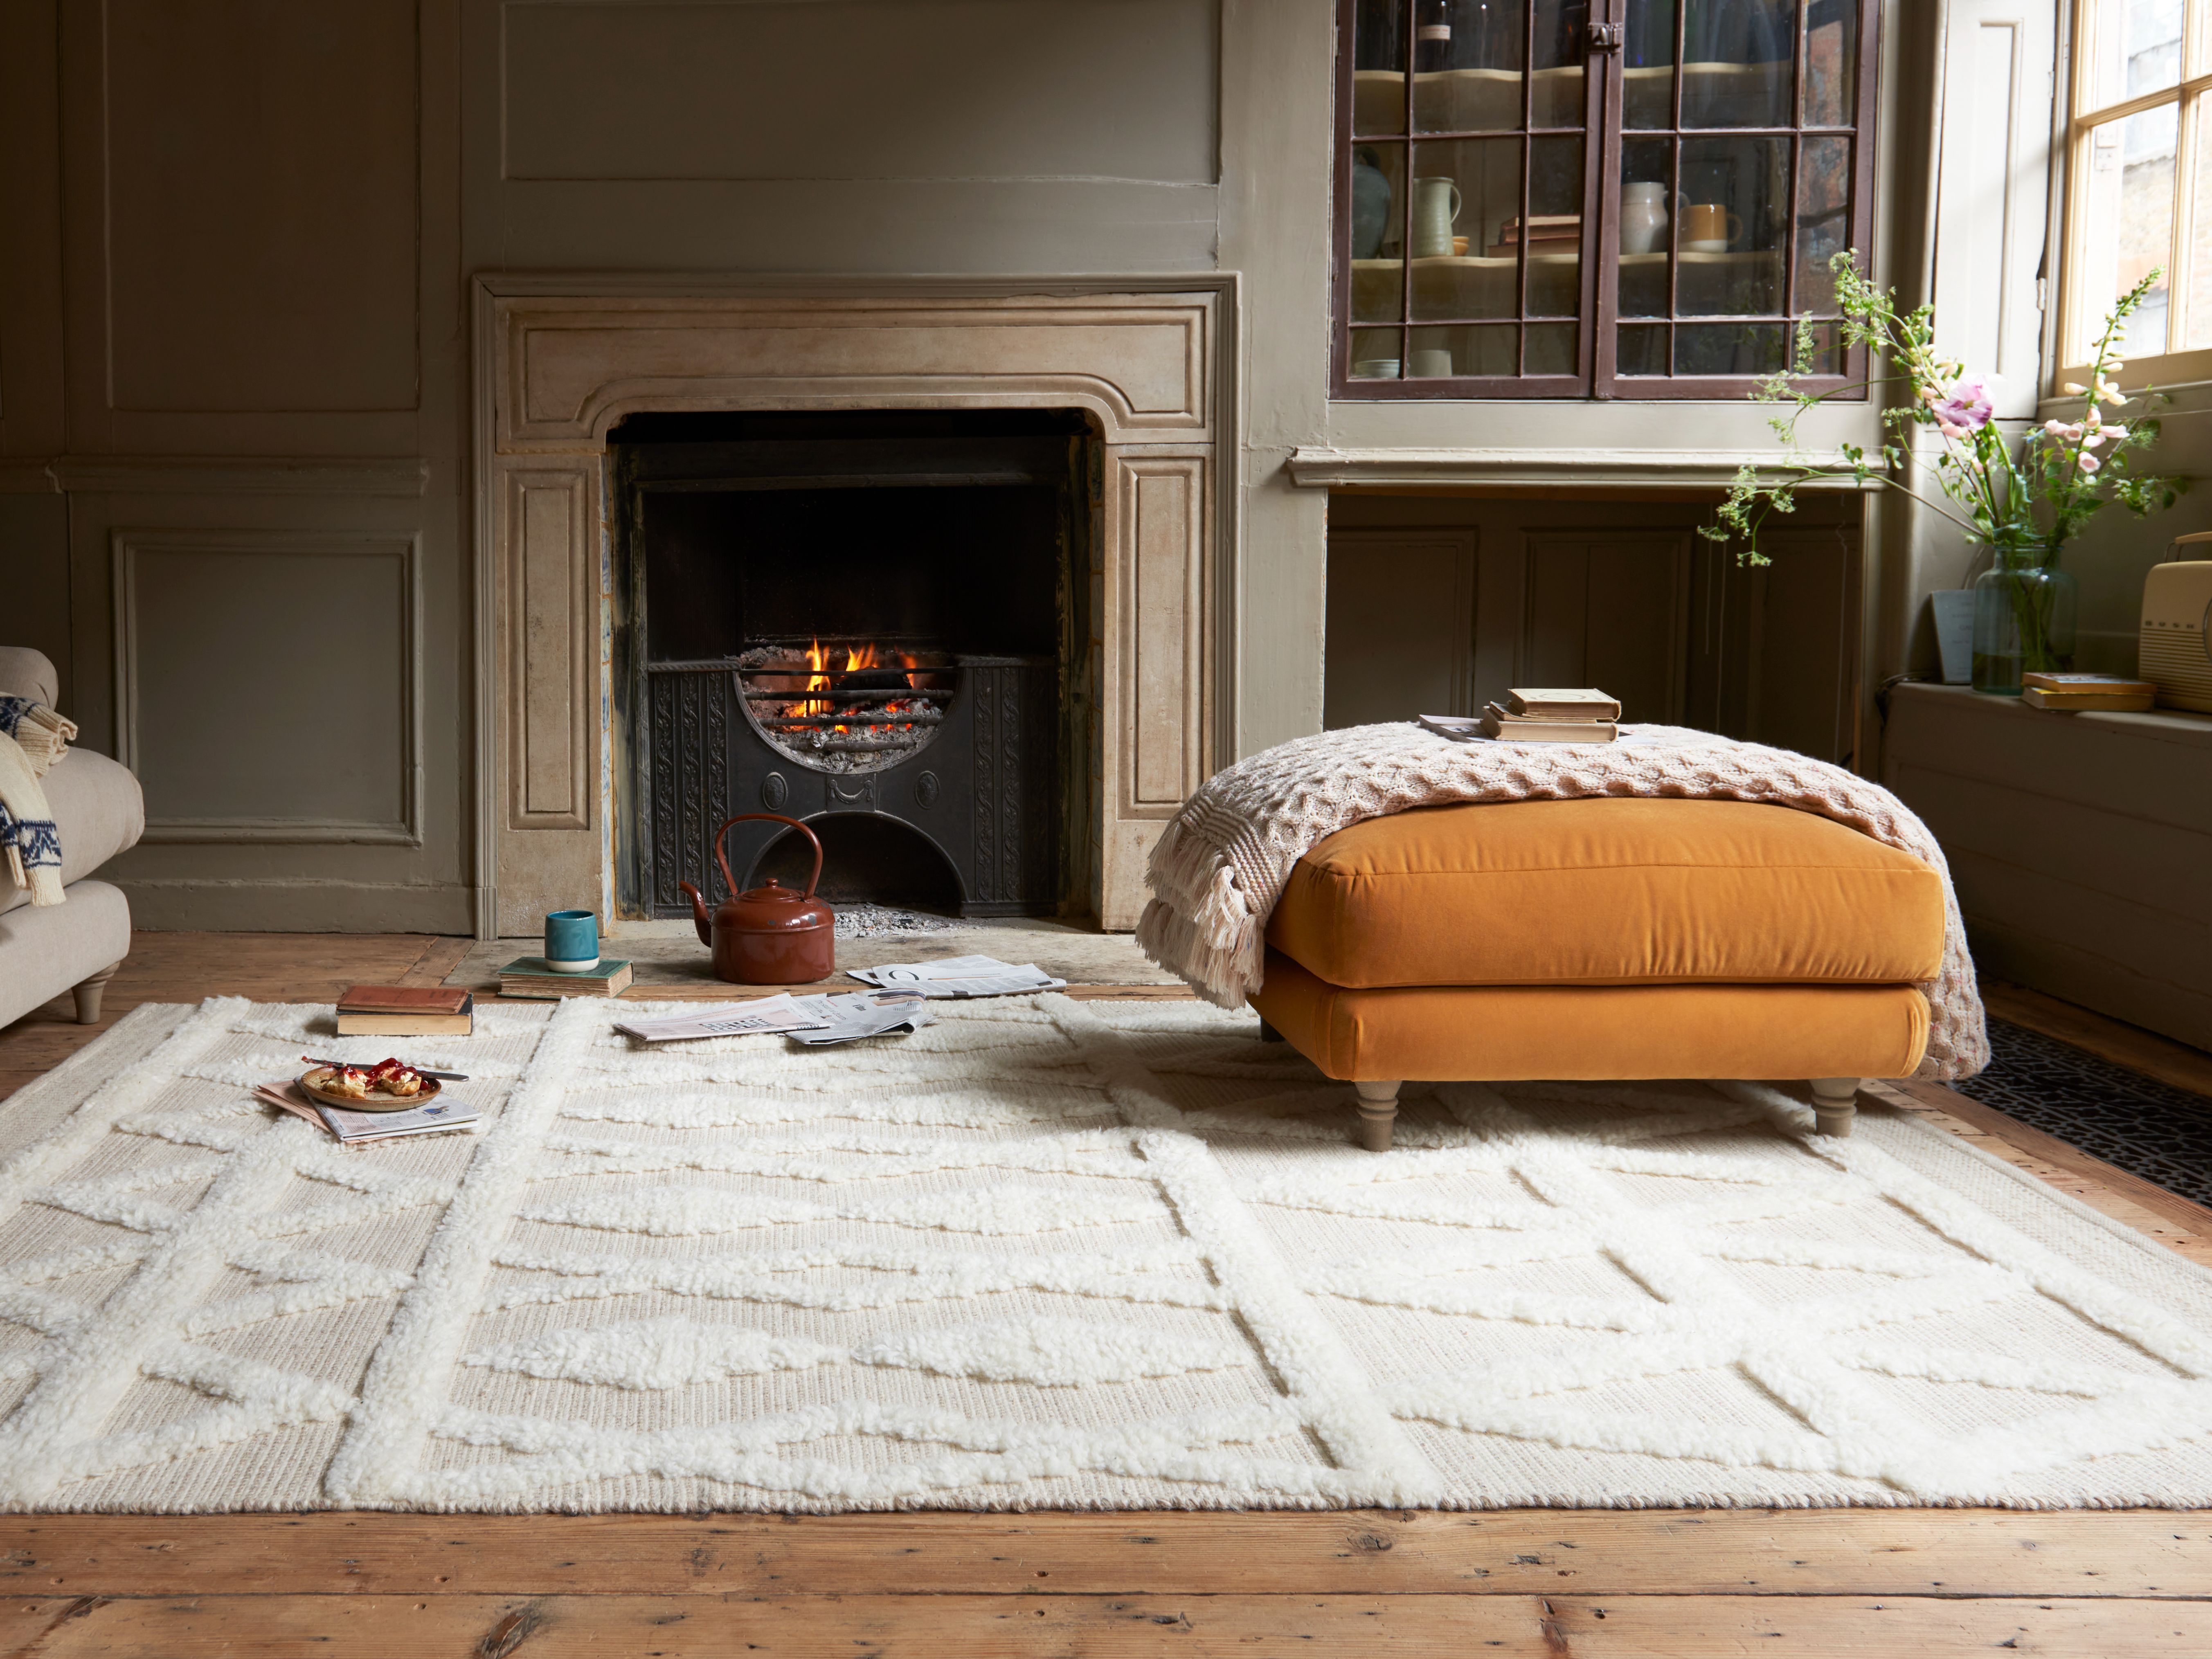 How To Clean A Wool Rug: Care, Stain Removal & What Not To Do